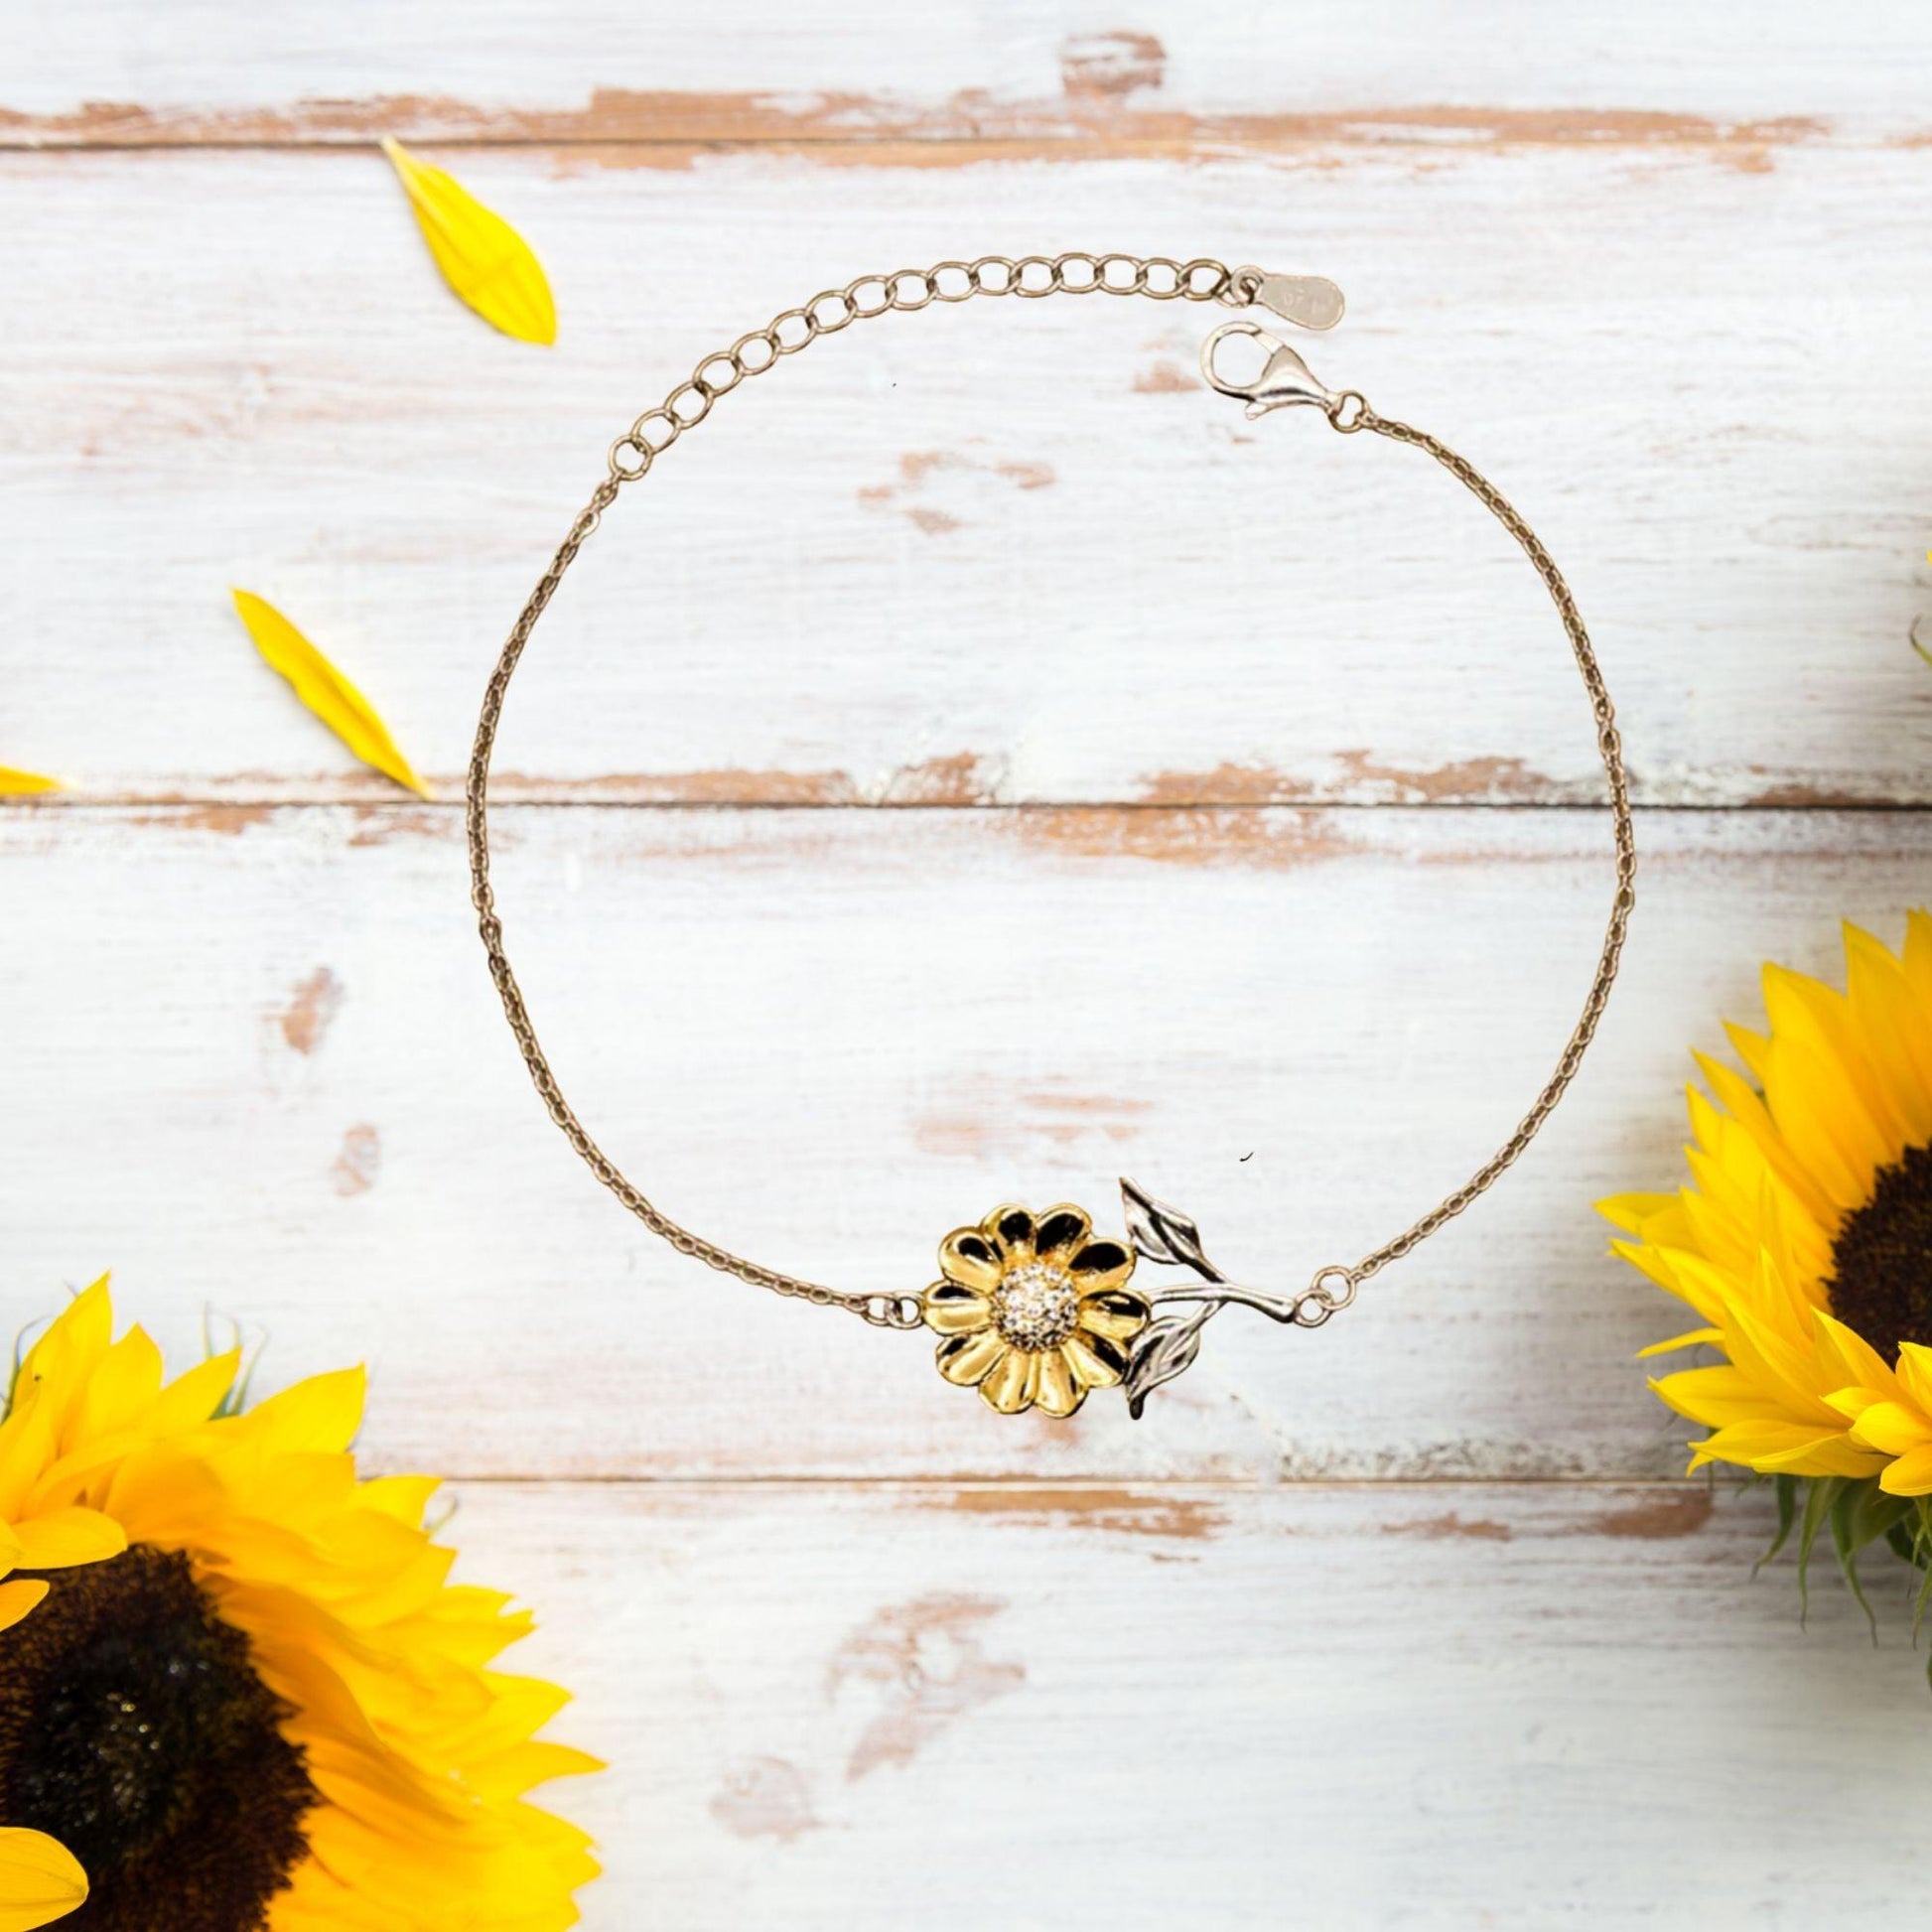 Director Sunflower Bracelet - Thanks for being who you are - Birthday Christmas Jewelry Gifts Coworkers Colleague Boss - Mallard Moon Gift Shop